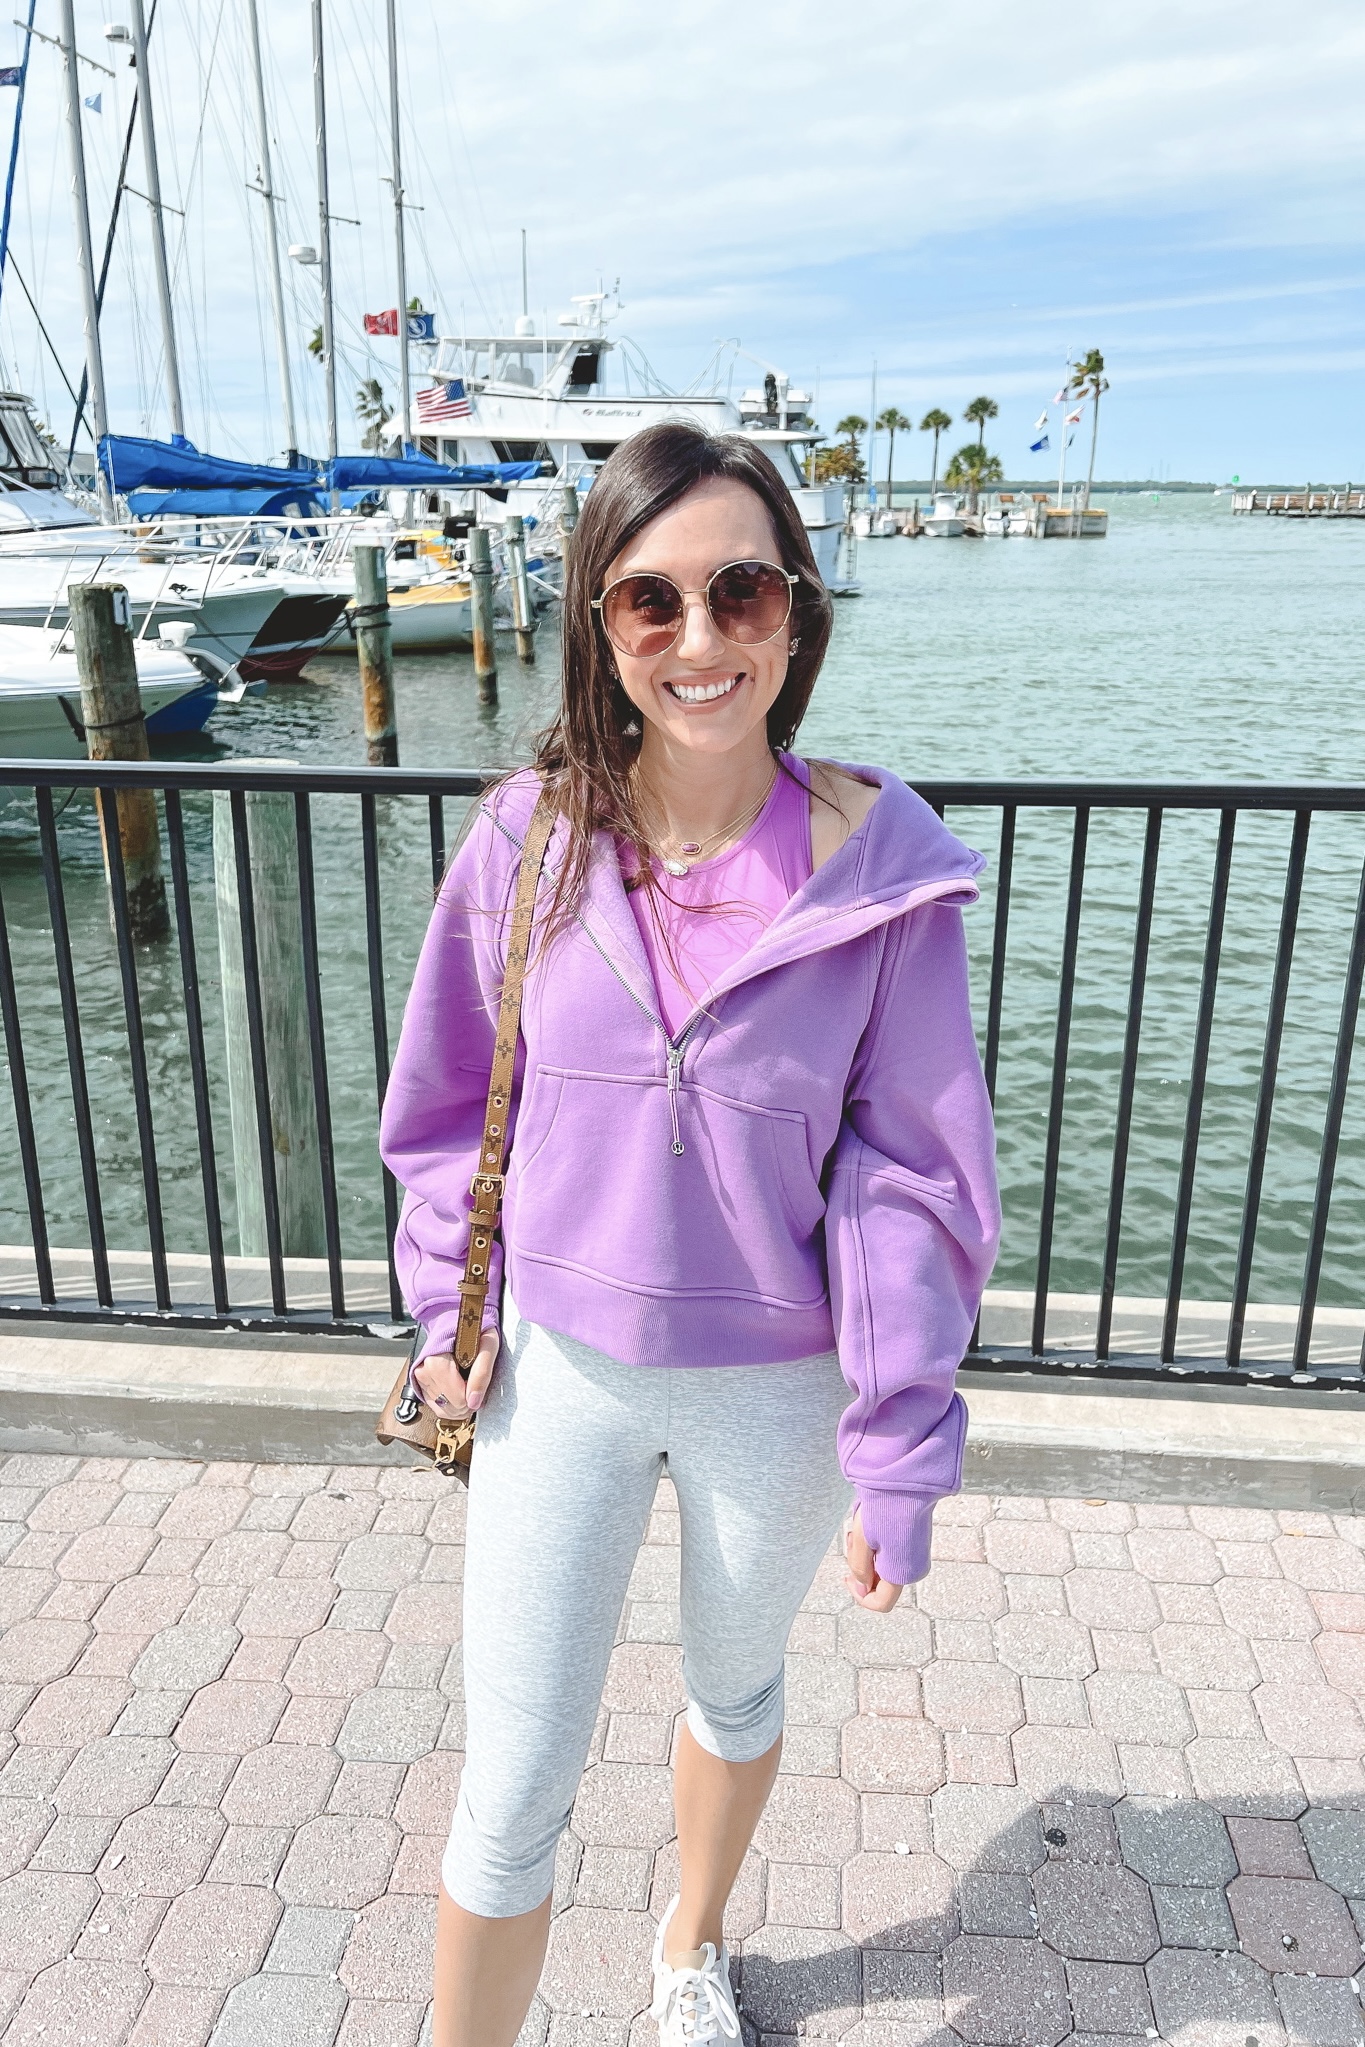 OOTD: Scuba half zip (requested tall person review) & Cadet Blue